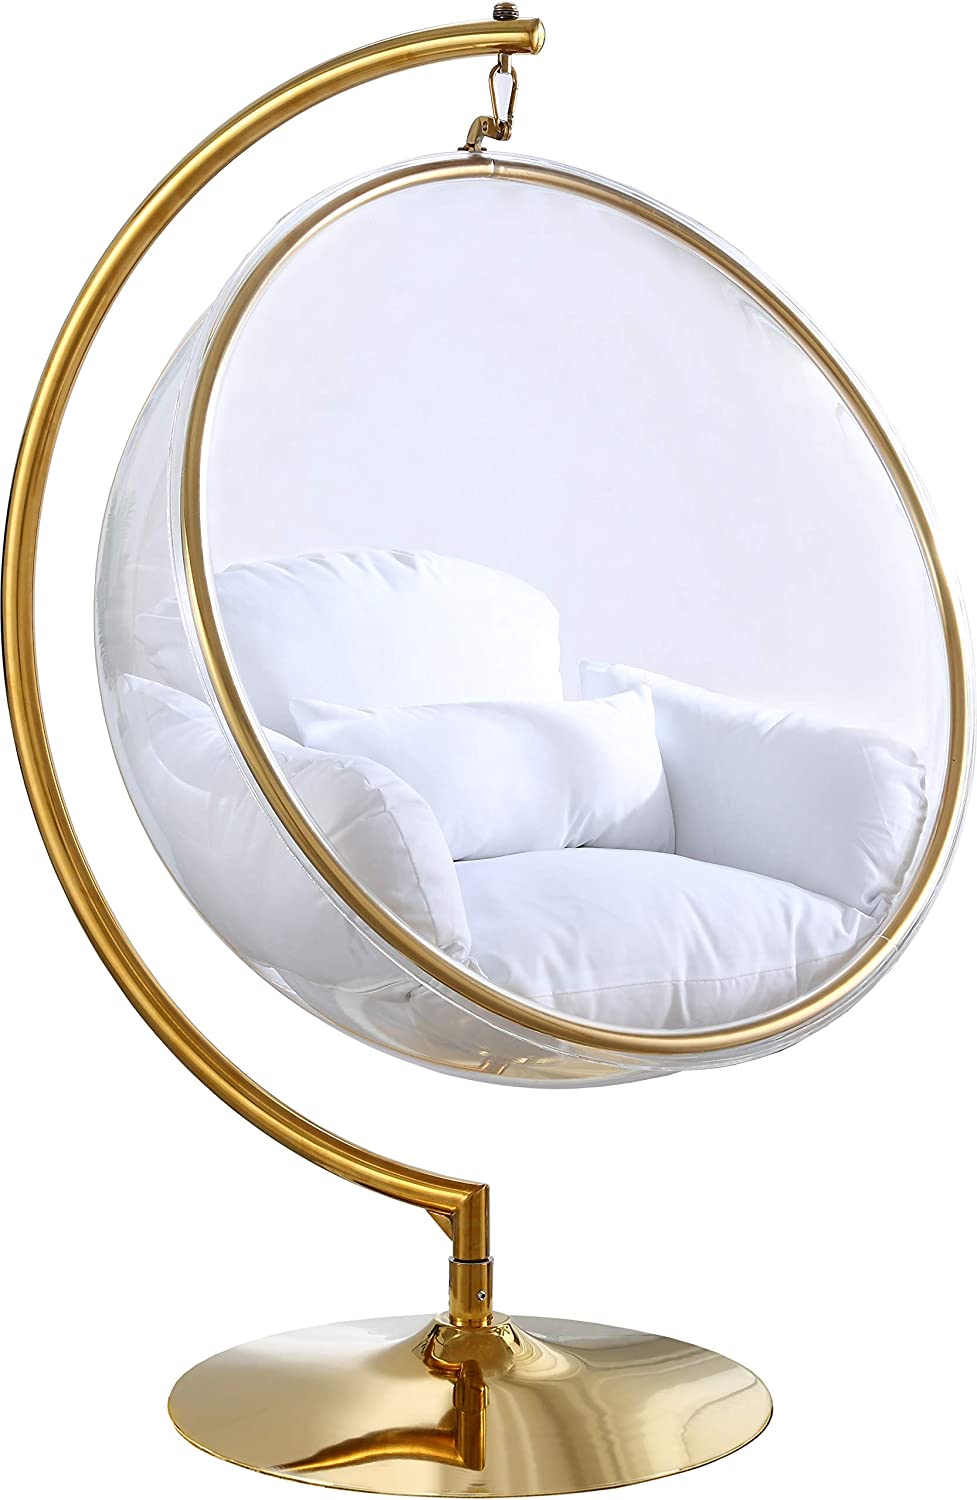 Golden Stand Acrylic Landing Bubble Chair with White Cushion Stocked in US Freeshipping